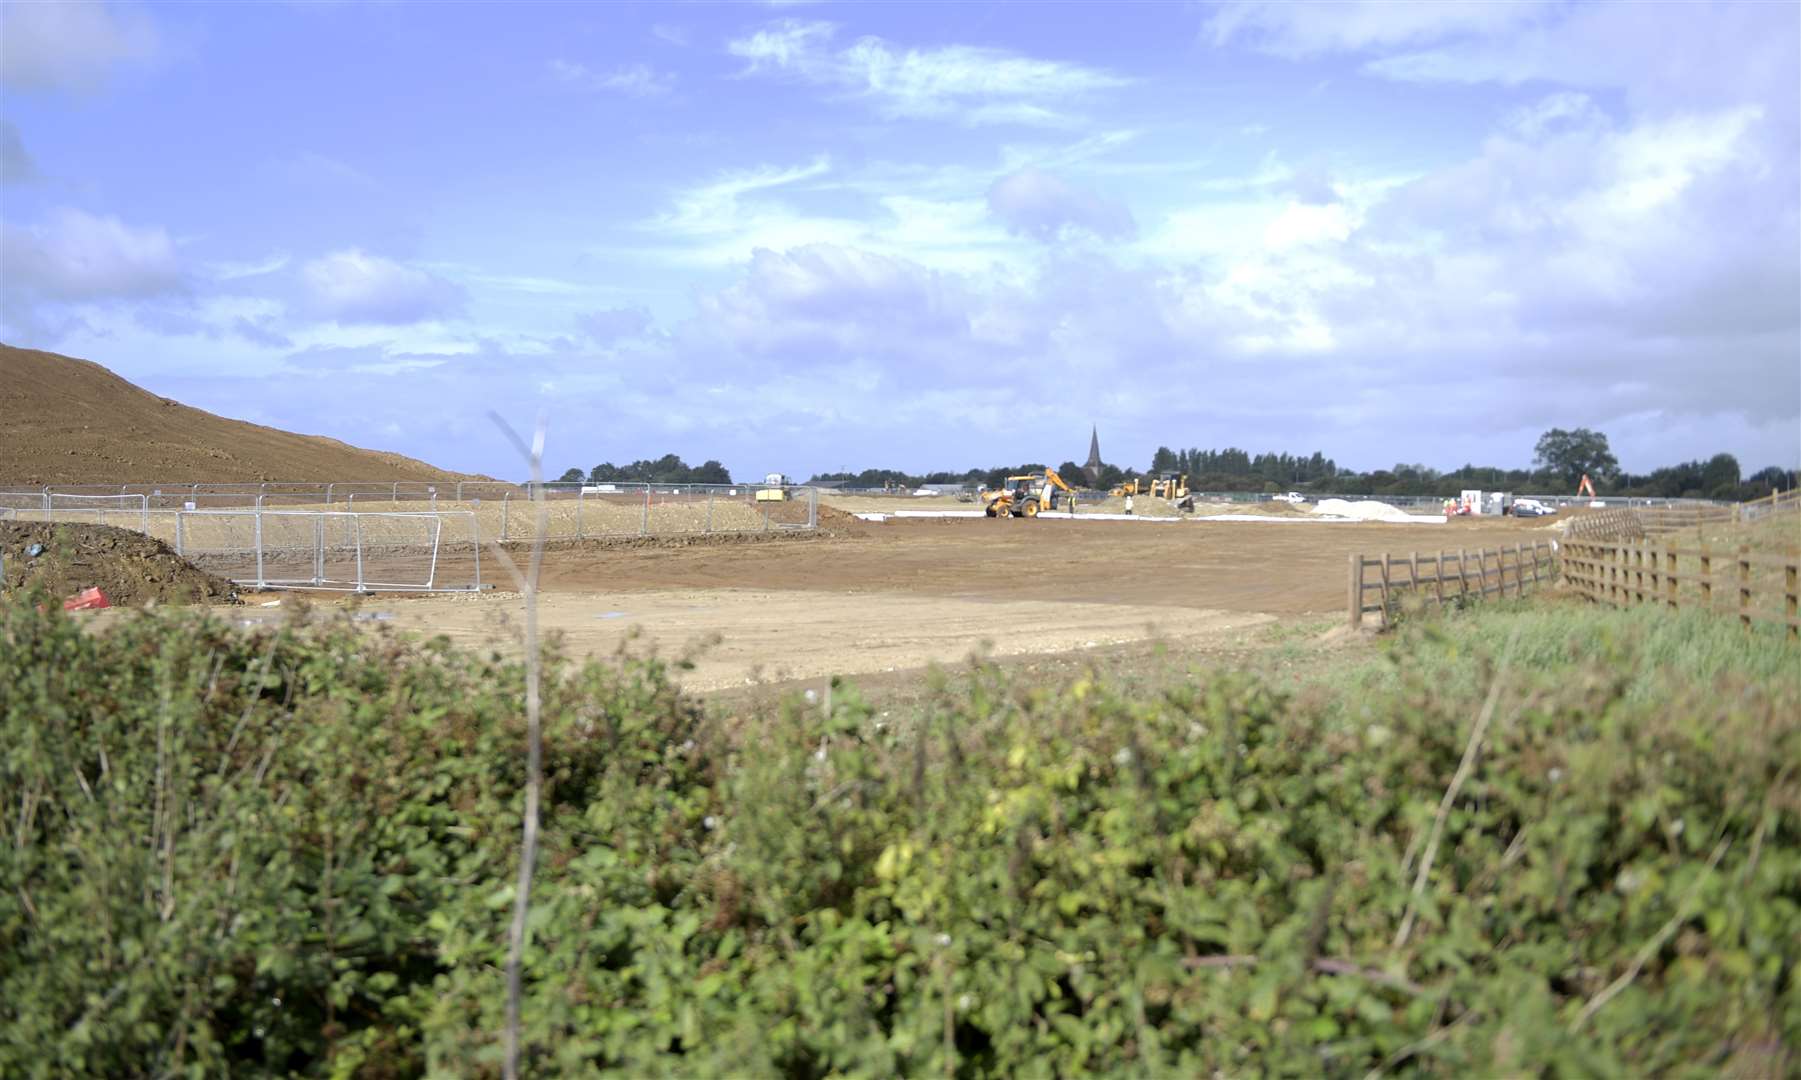 Work started on the site in July. Picture: Barry Goodwin